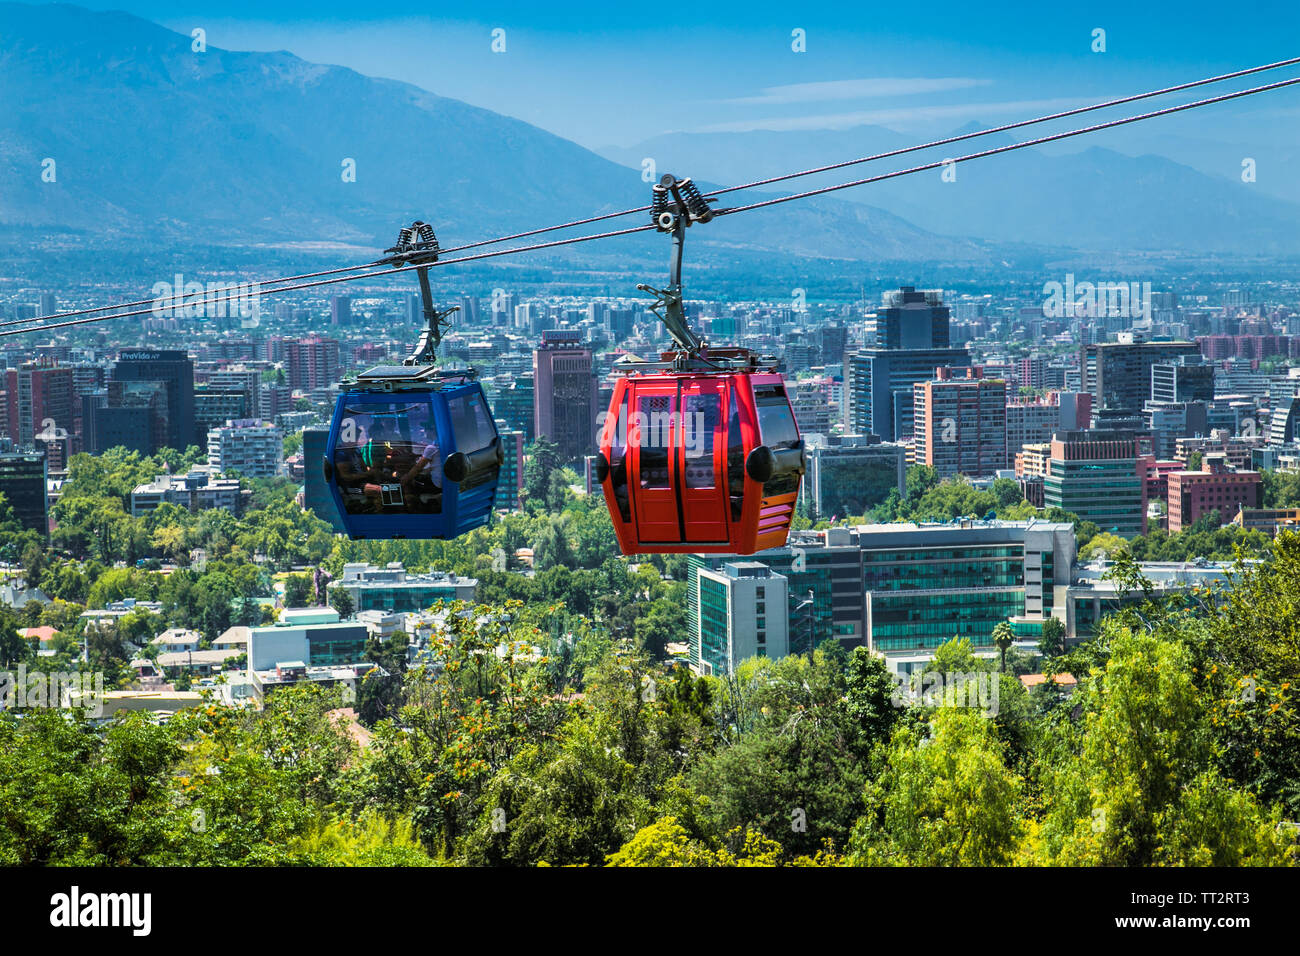 Santiago, Chile - Dec 29, 2018: Cable car in San Cristobal hill overlooking a panoramic view of Santiago de Chile Stock Photo